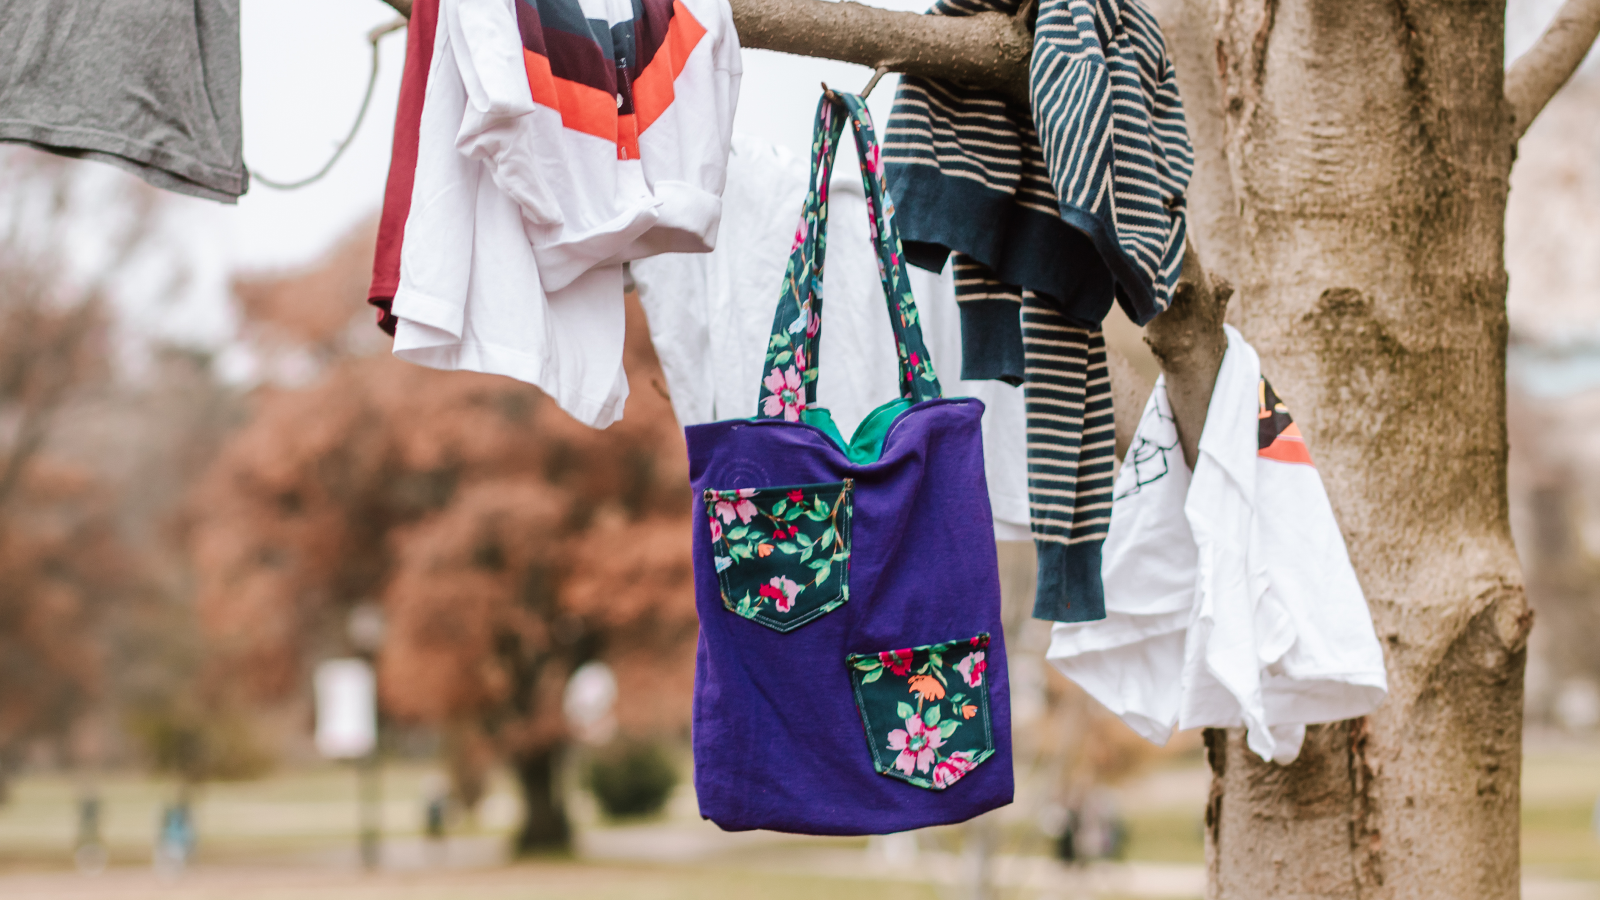 handcrafted bag pictured hanging from a tree alongside t-shirts